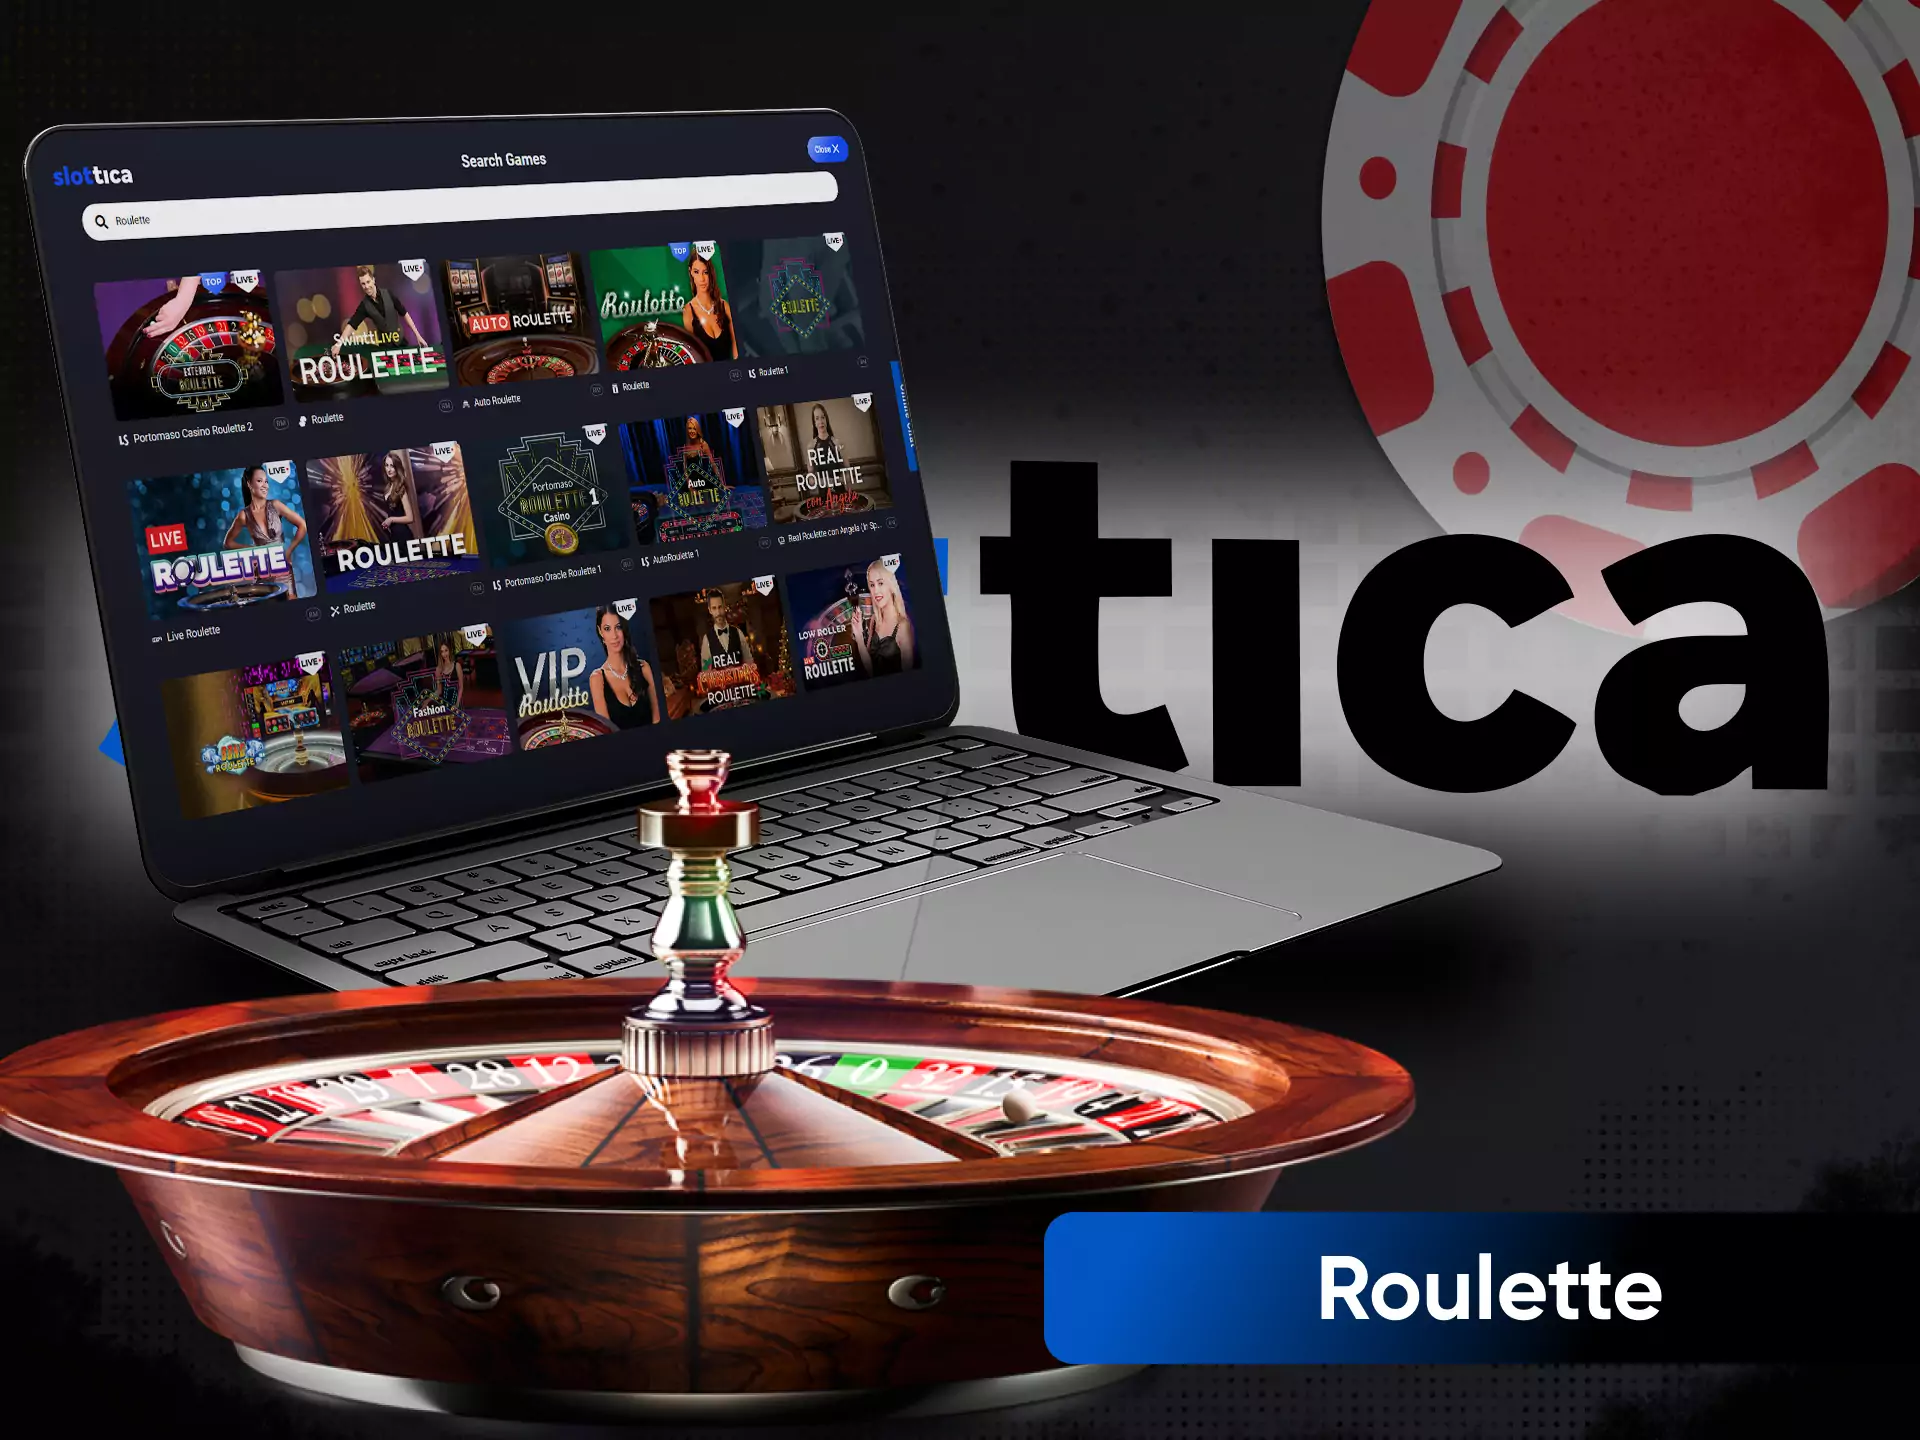 In the Slottica Casino, you can play online roulette.